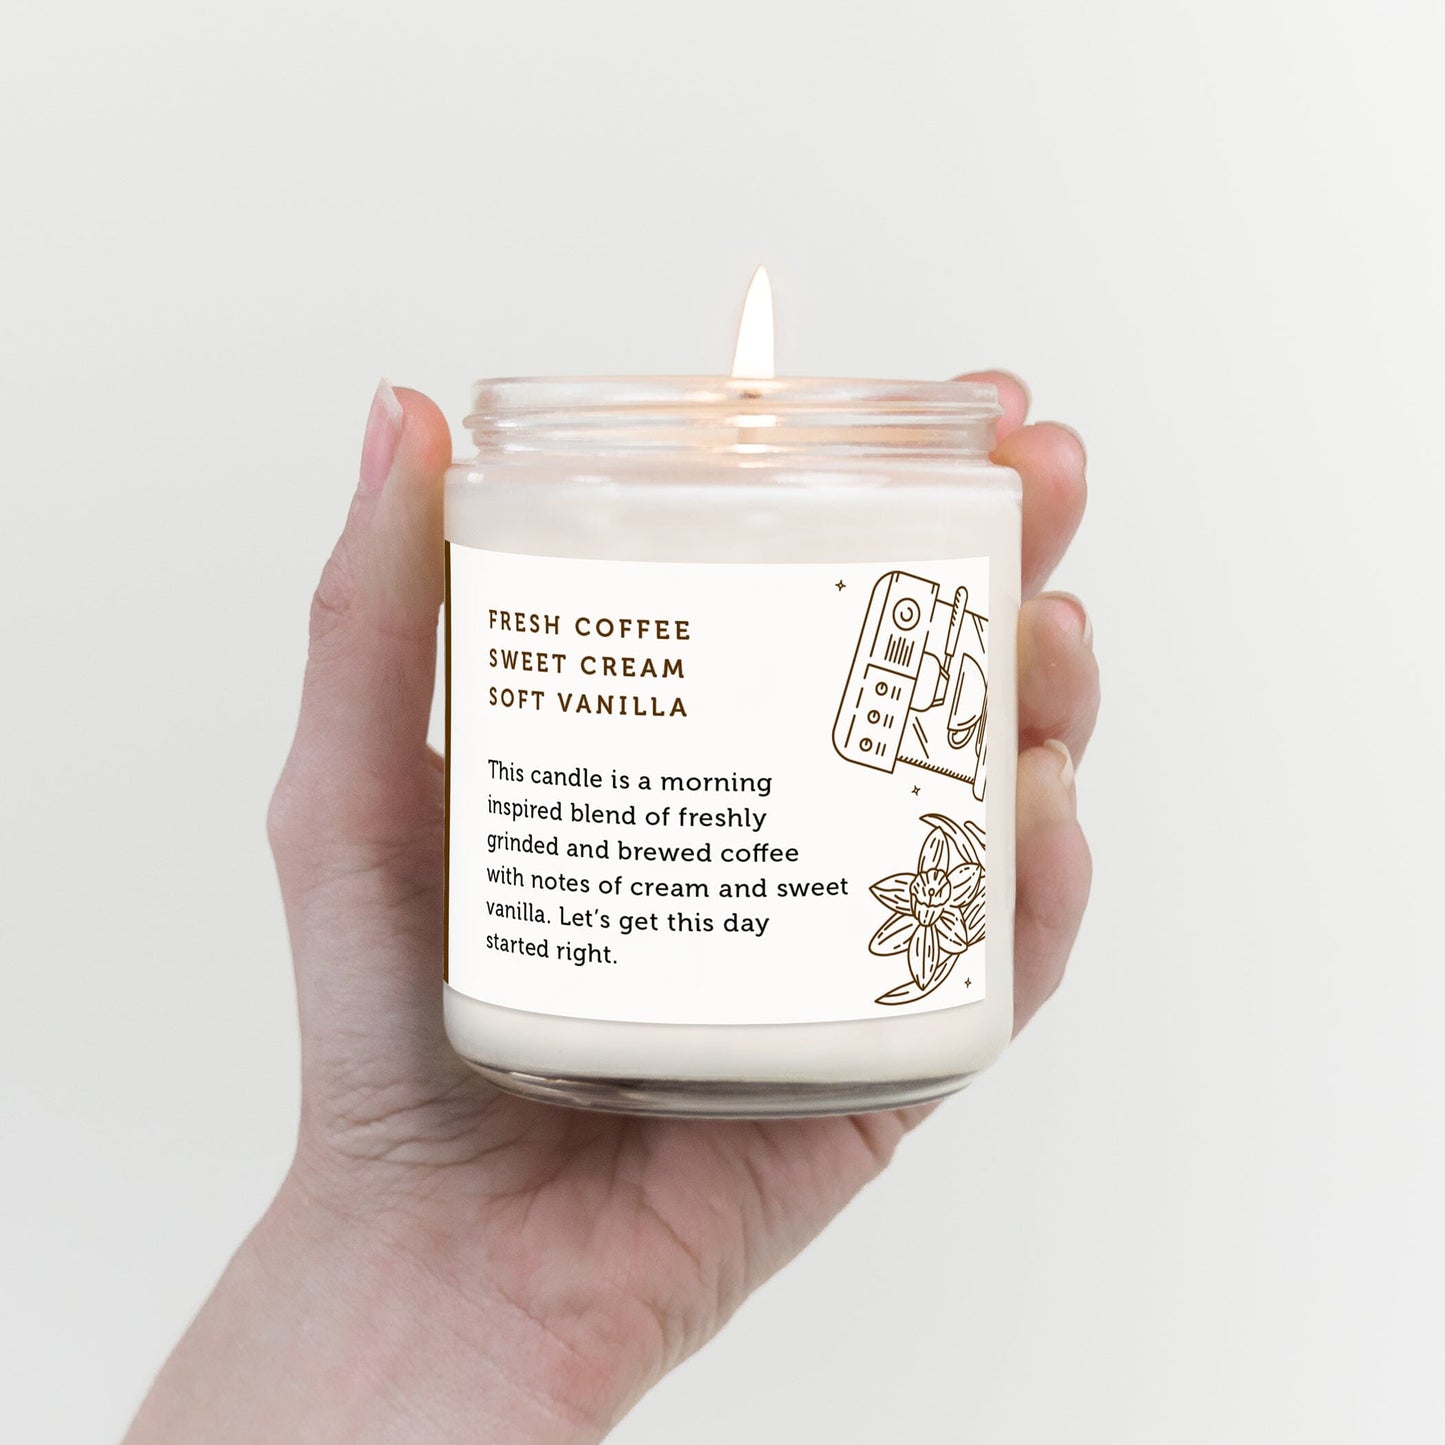 Rise and Grind Candle Candles CE Craft 